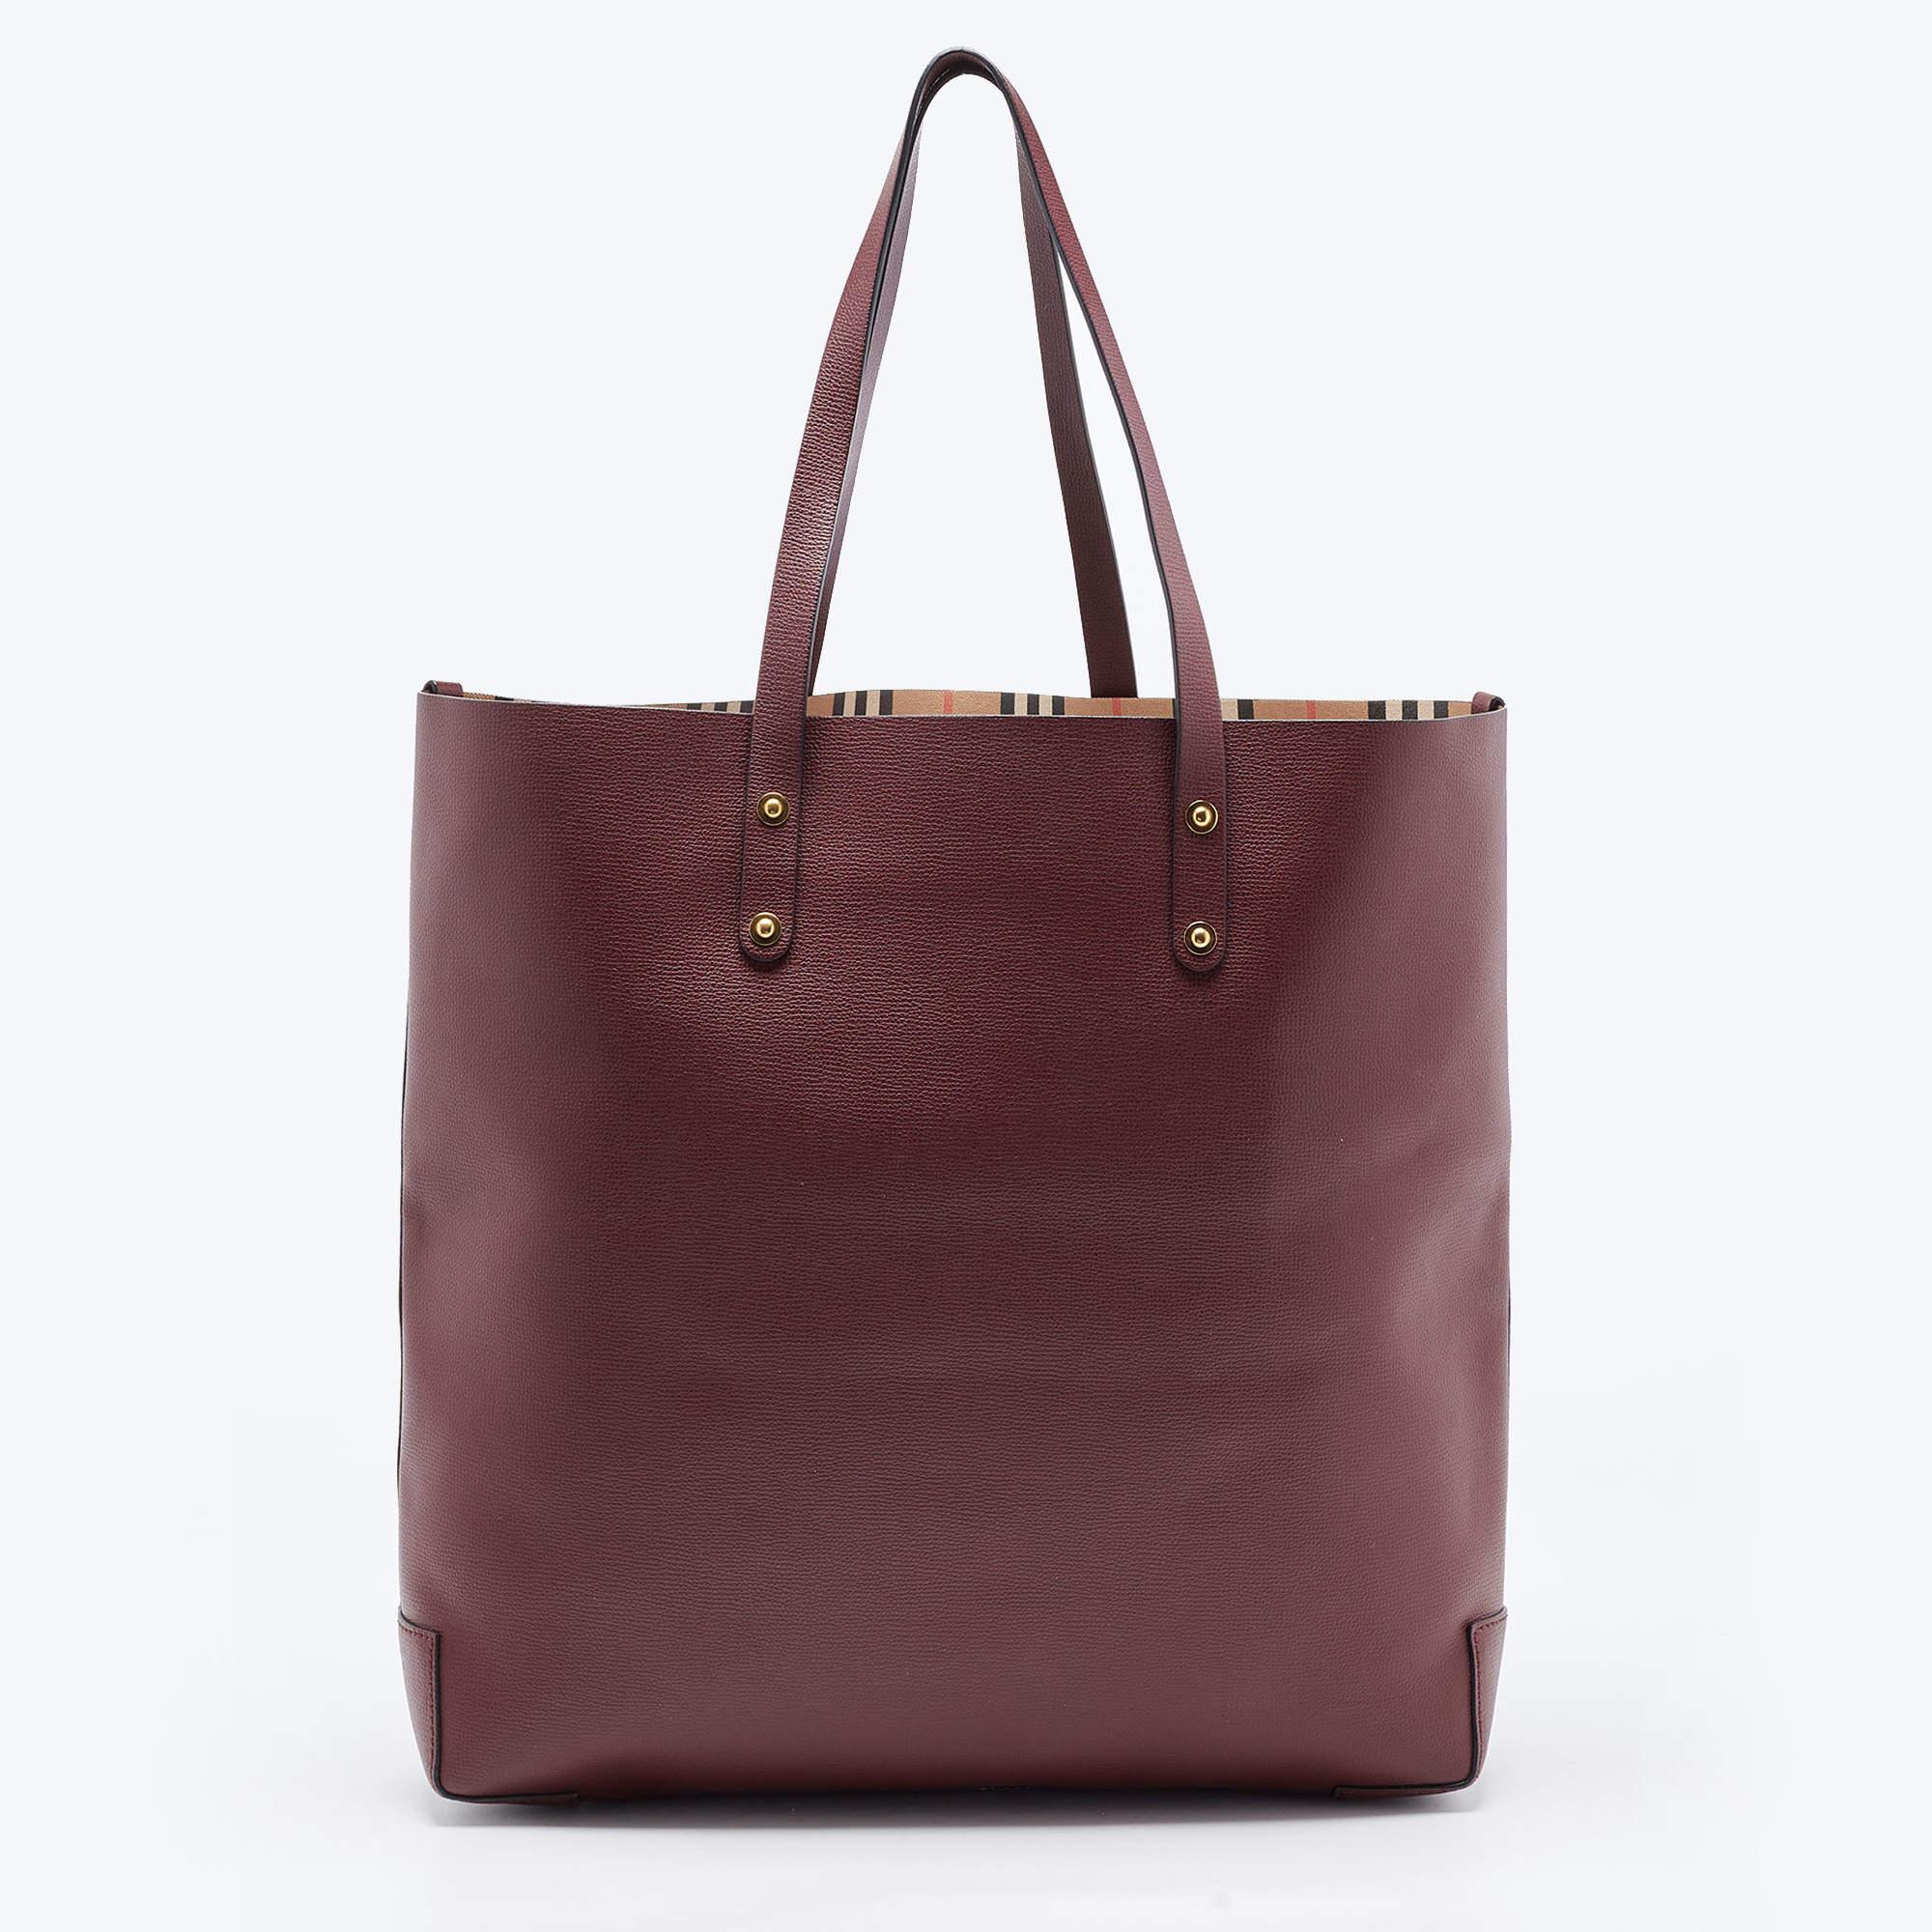 Created from high-quality materials, this tote is enriched with functional and classic elements. It can be carried around conveniently, and its interior is perfectly sized to keep your belongings with ease.

Includes: Info Booklet